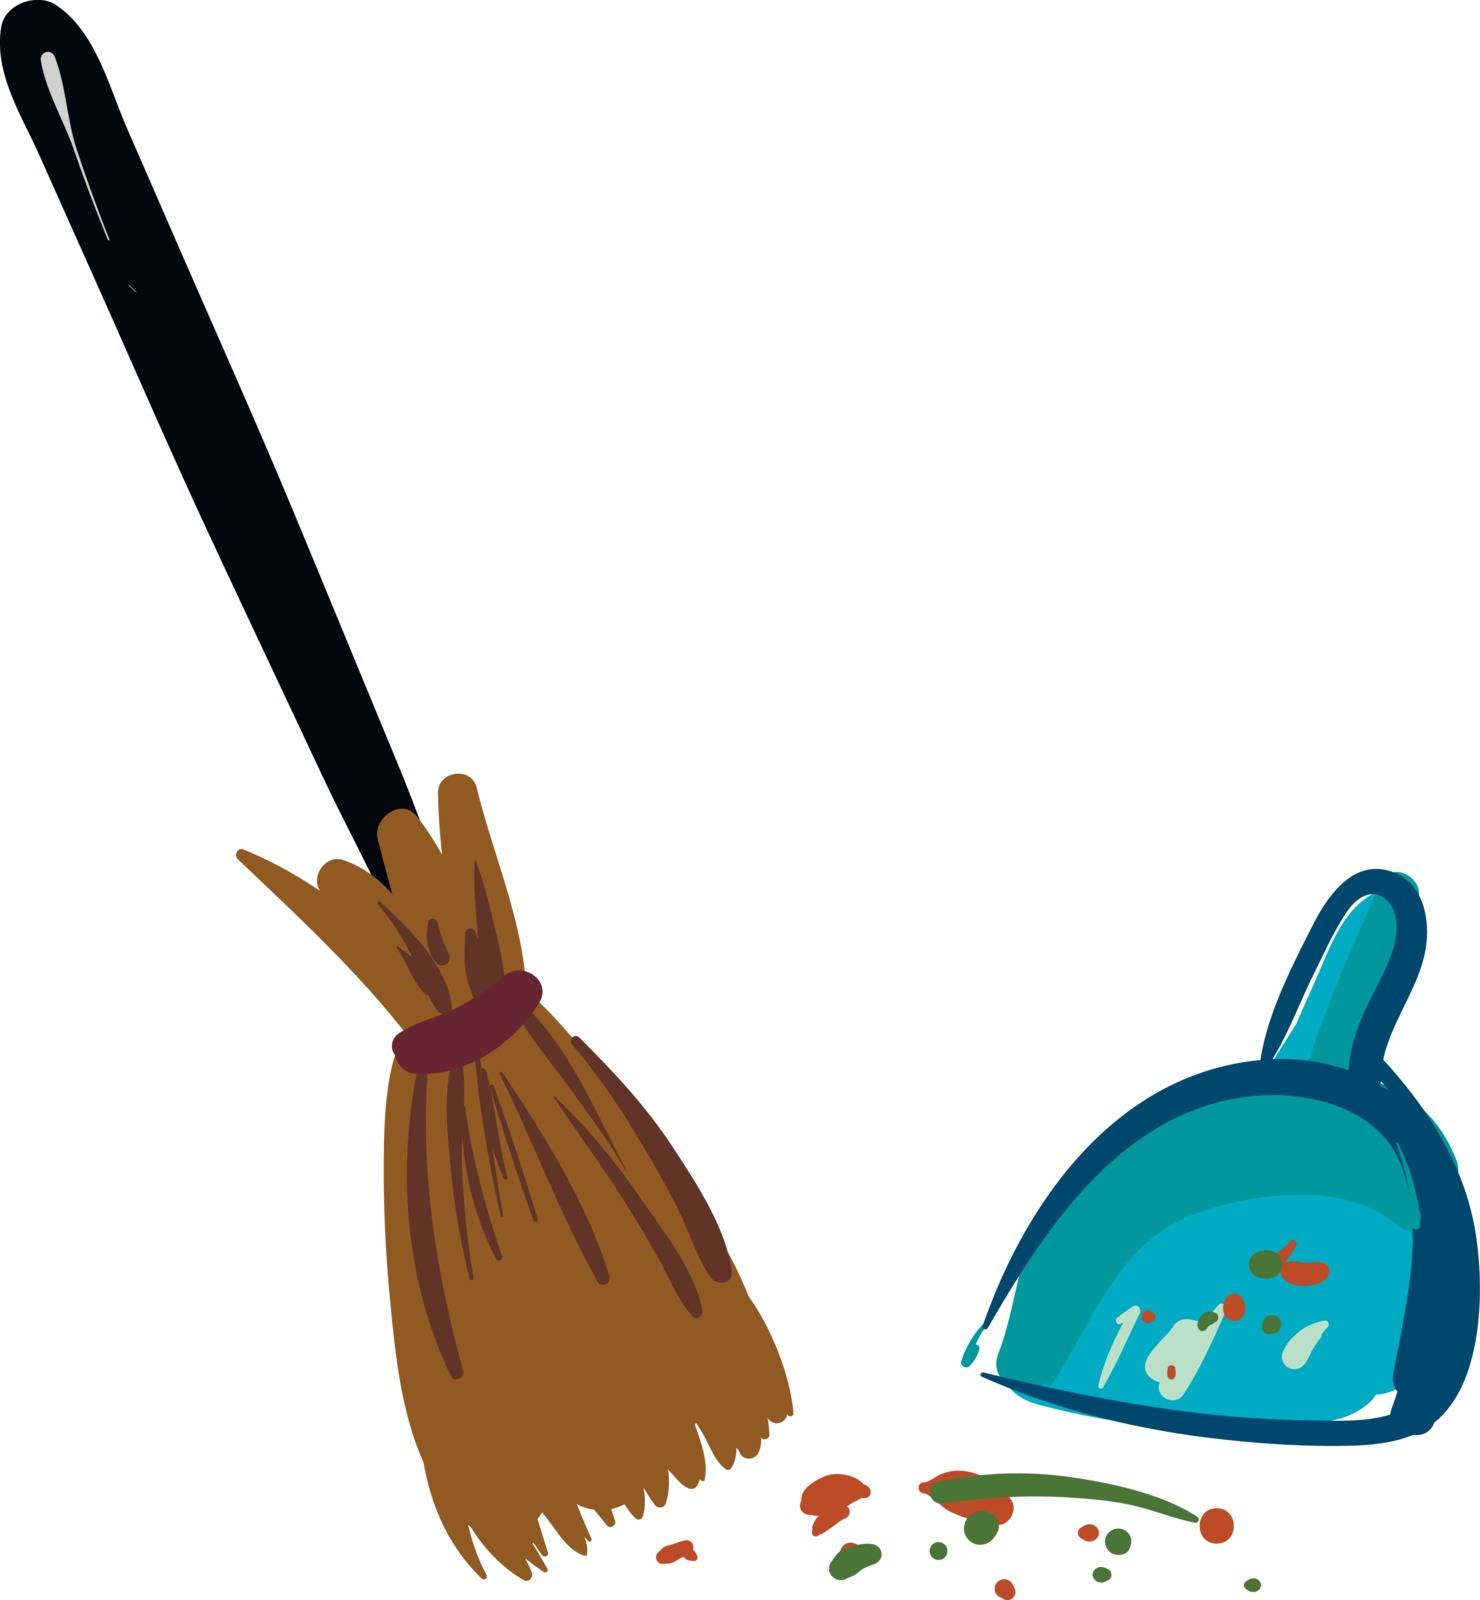 Lot of dust to be cleaned with a long broom and a blue dustpan , vector, color drawing or illustration.